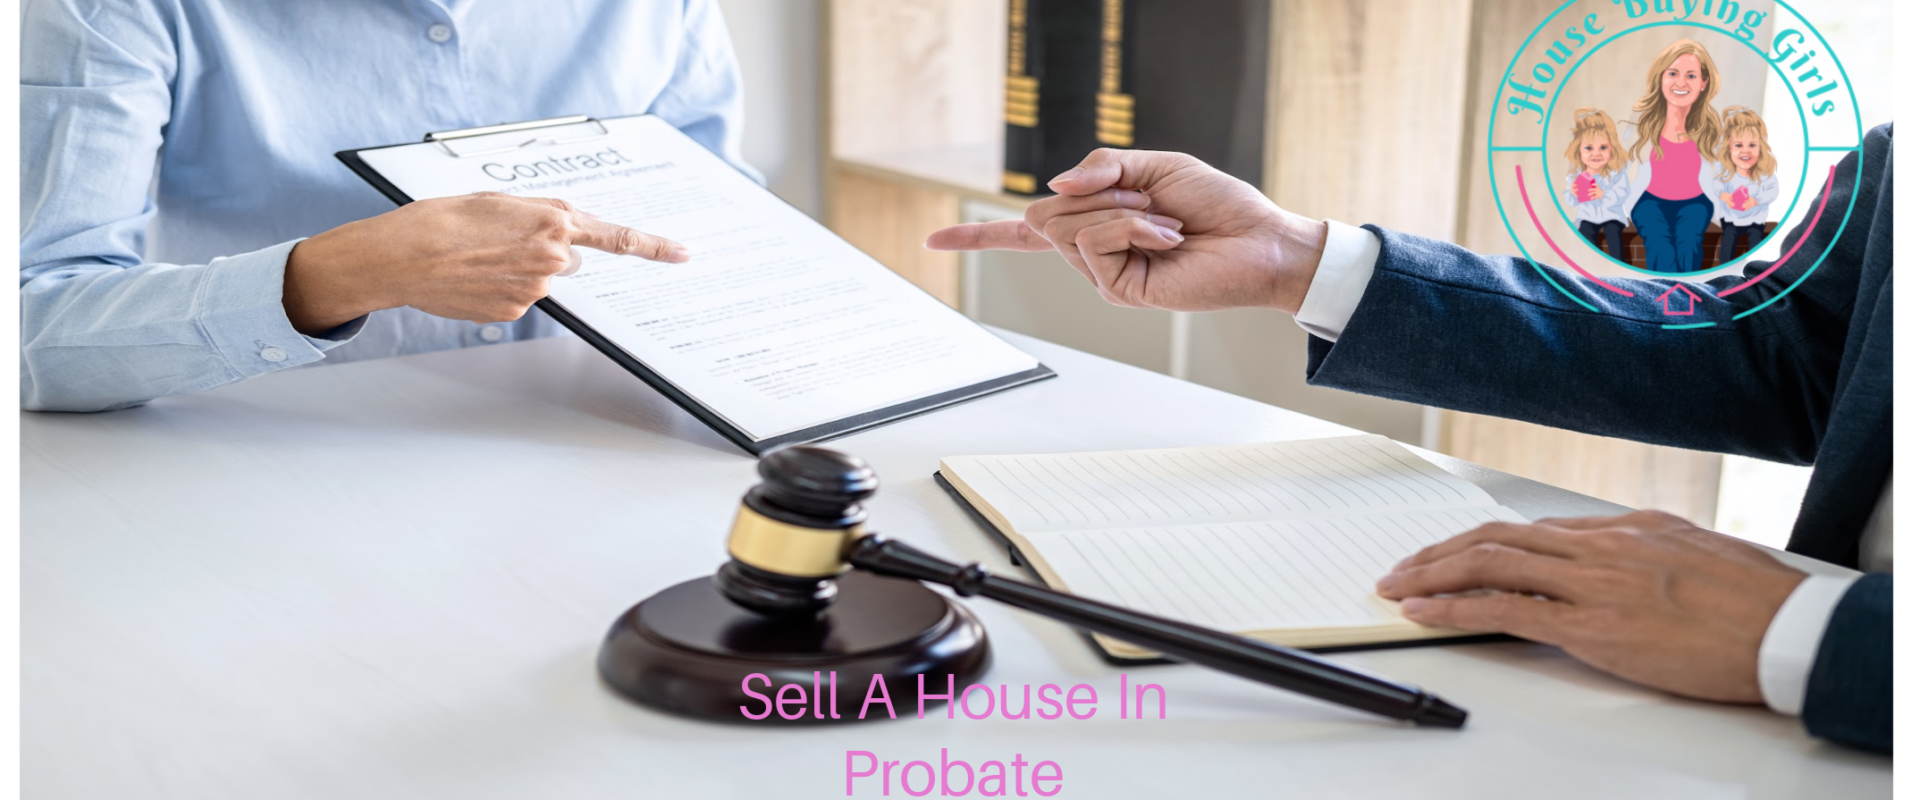 sell a house in probate in Texas